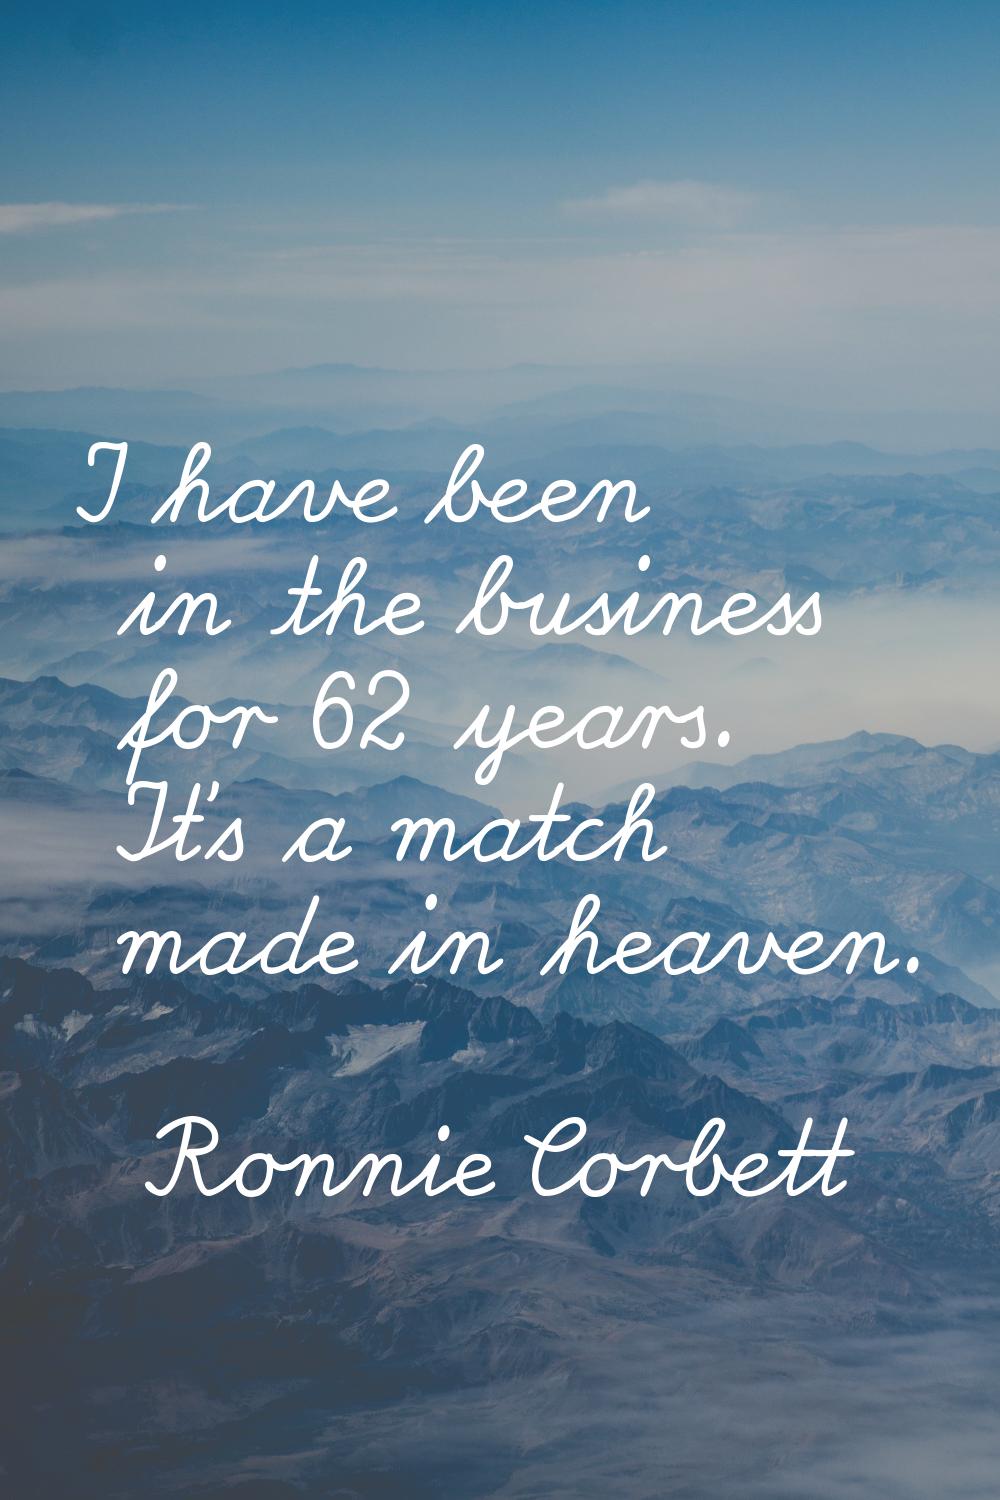 I have been in the business for 62 years. It's a match made in heaven.